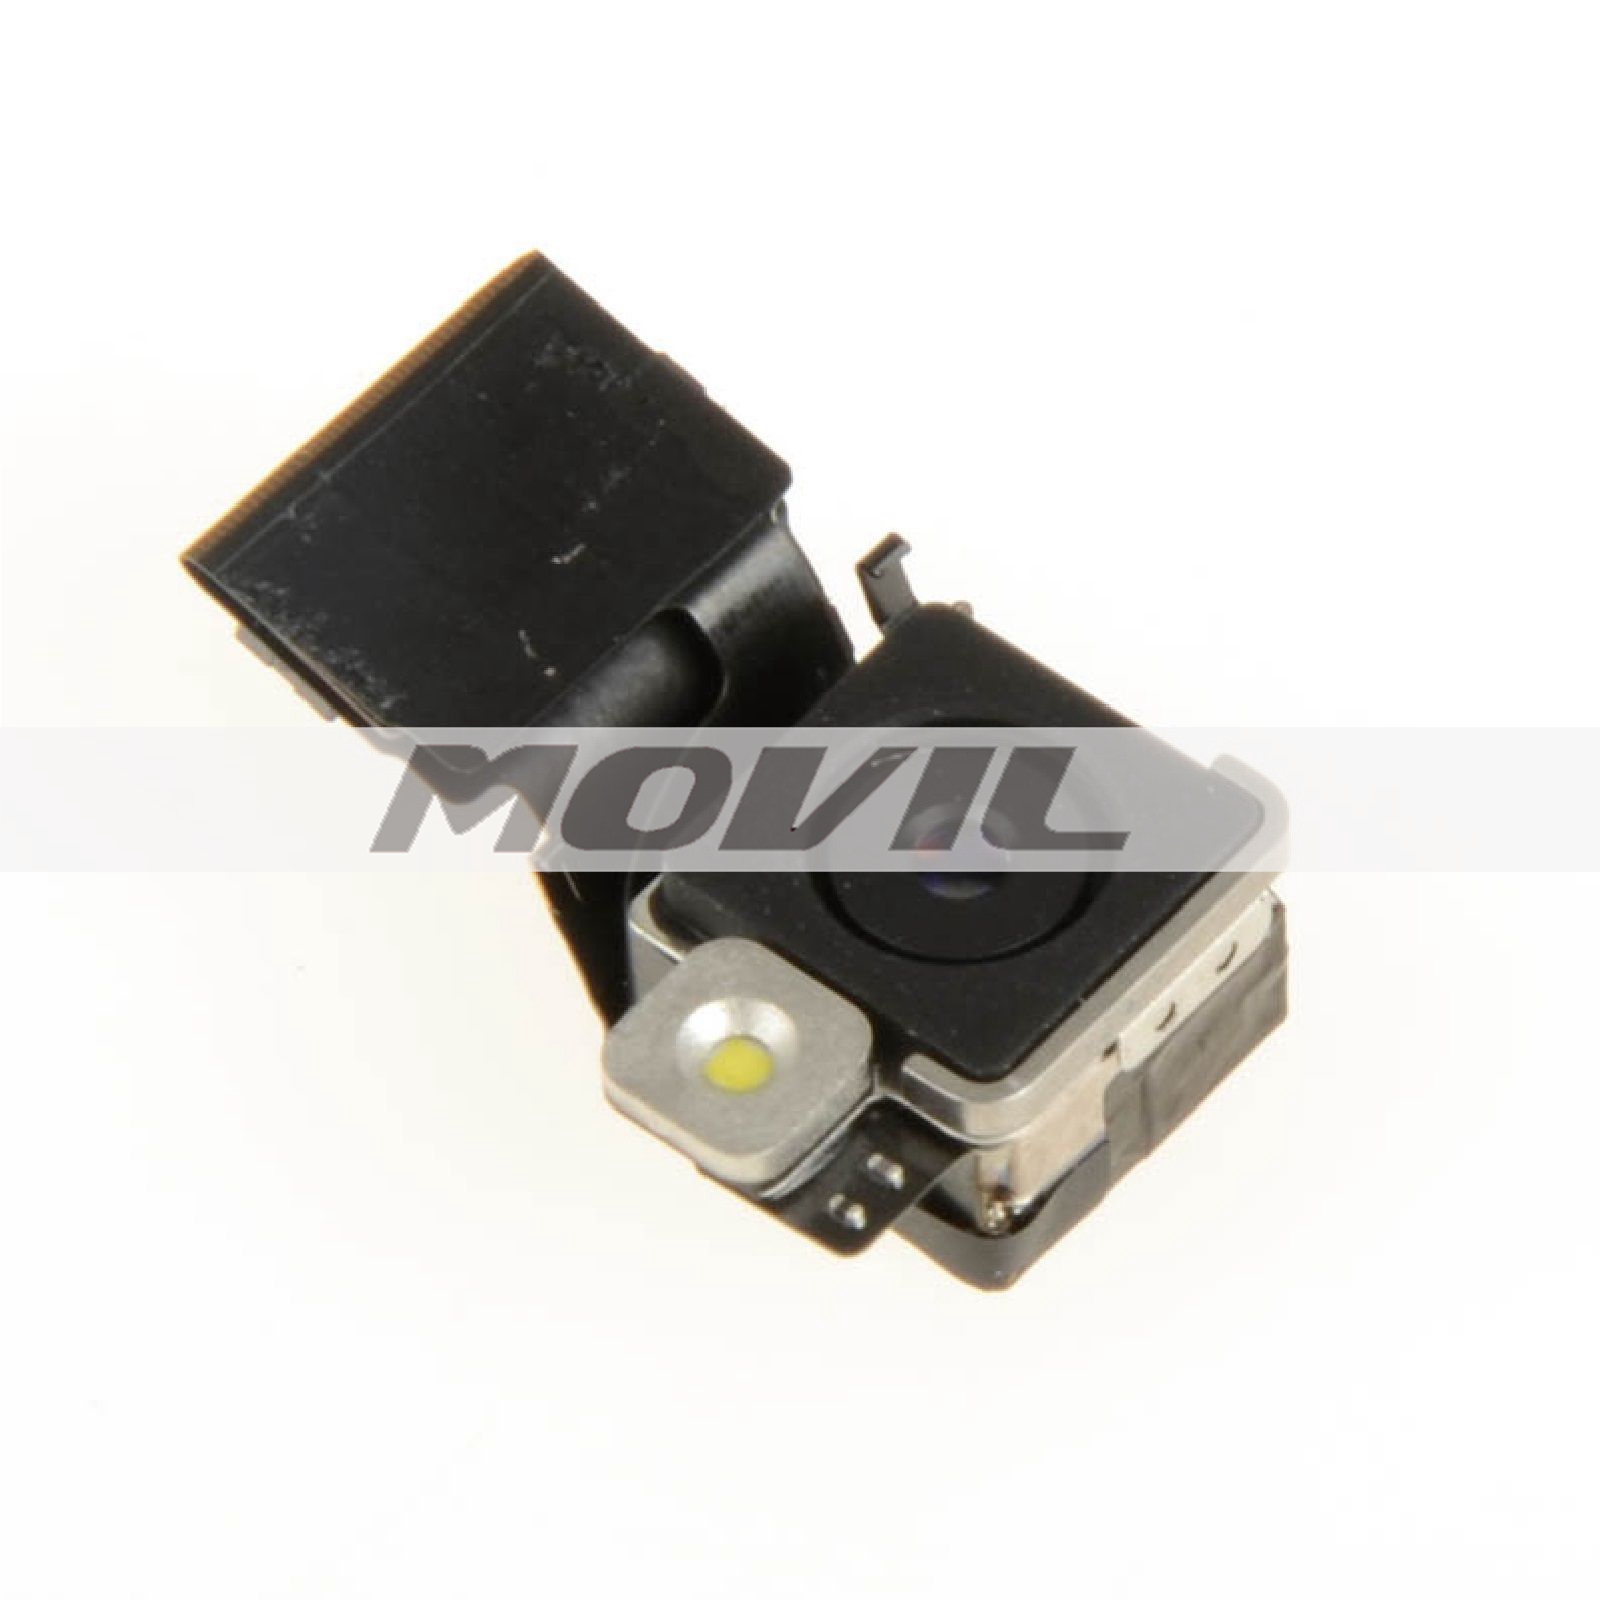 Replacement Rear Back Camera With Flash For iPhone 4S